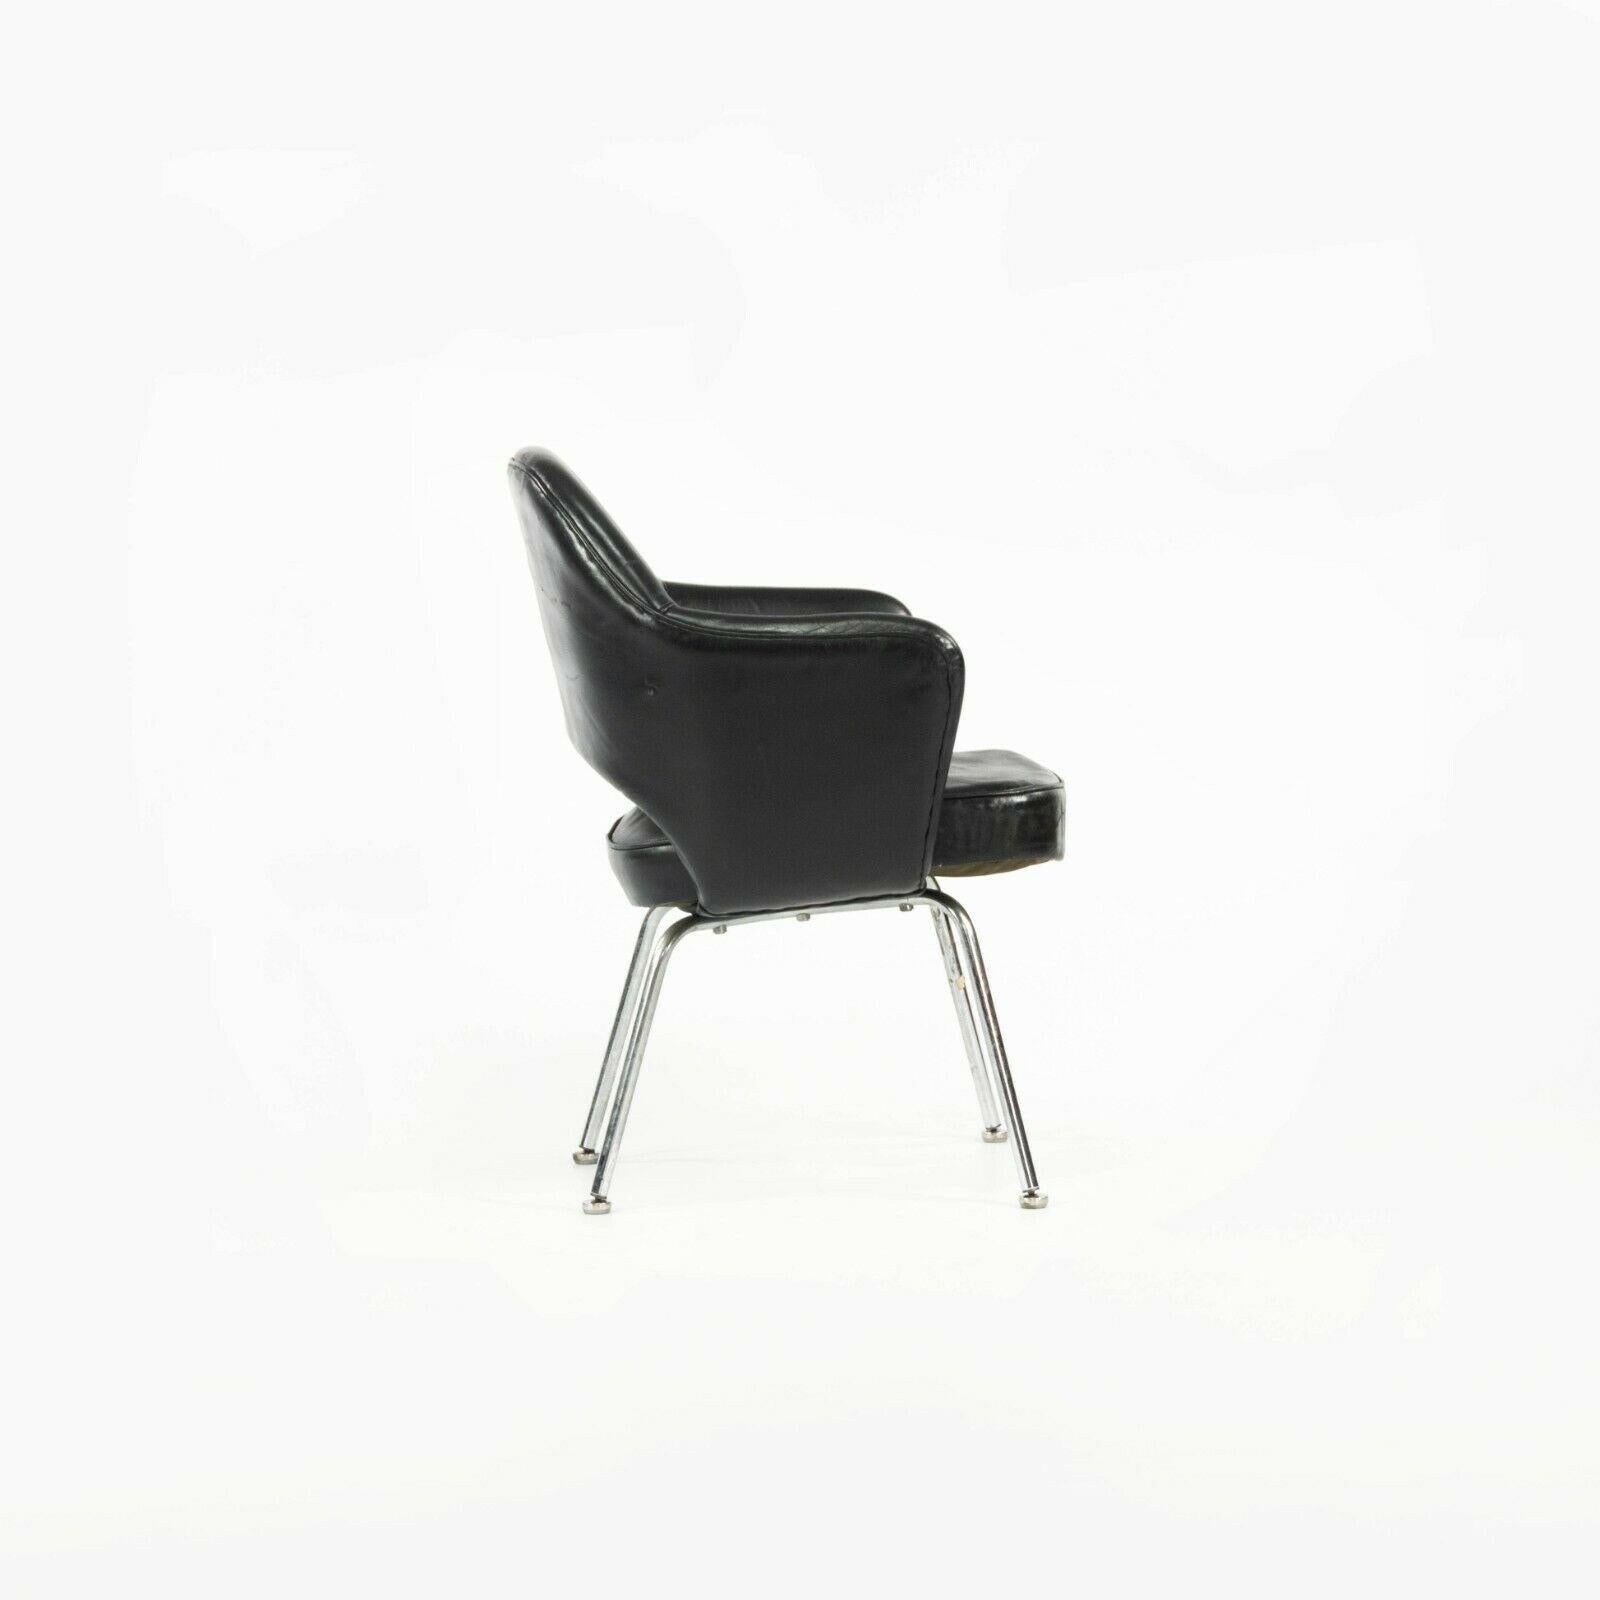 Modern 1960s Eero Saarinen for Knoll Executive Dining Arm Chair in Black Leather For Sale